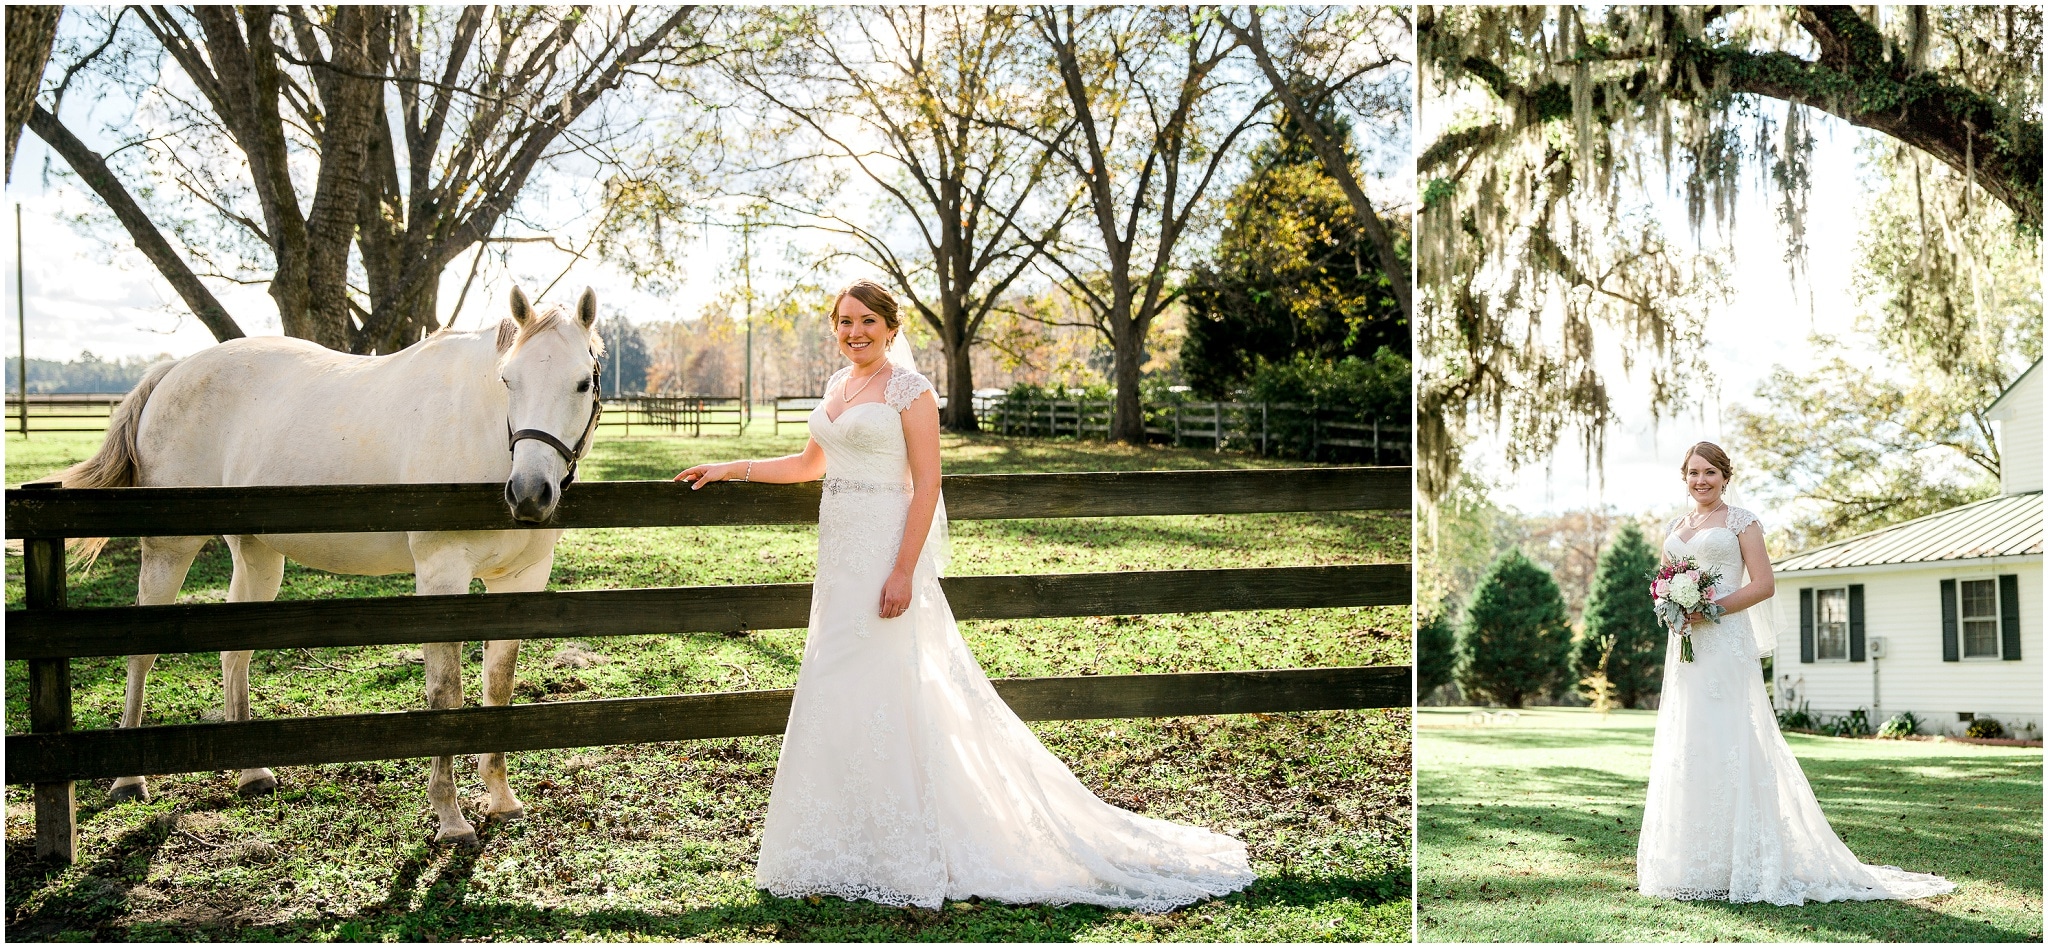 Paige in her wedding dress with a white horse and under a willow tree, Upper Mill Plantation Wedding Session 5, Conway, South Carolina, Wedding coordinator, flowers and Cake - Willow Event Designs, Venue - Upper Mill Plantation, DJ - Carolina Entertainment, Dress - Foxy Lady, www.onelifephoto.net Photography